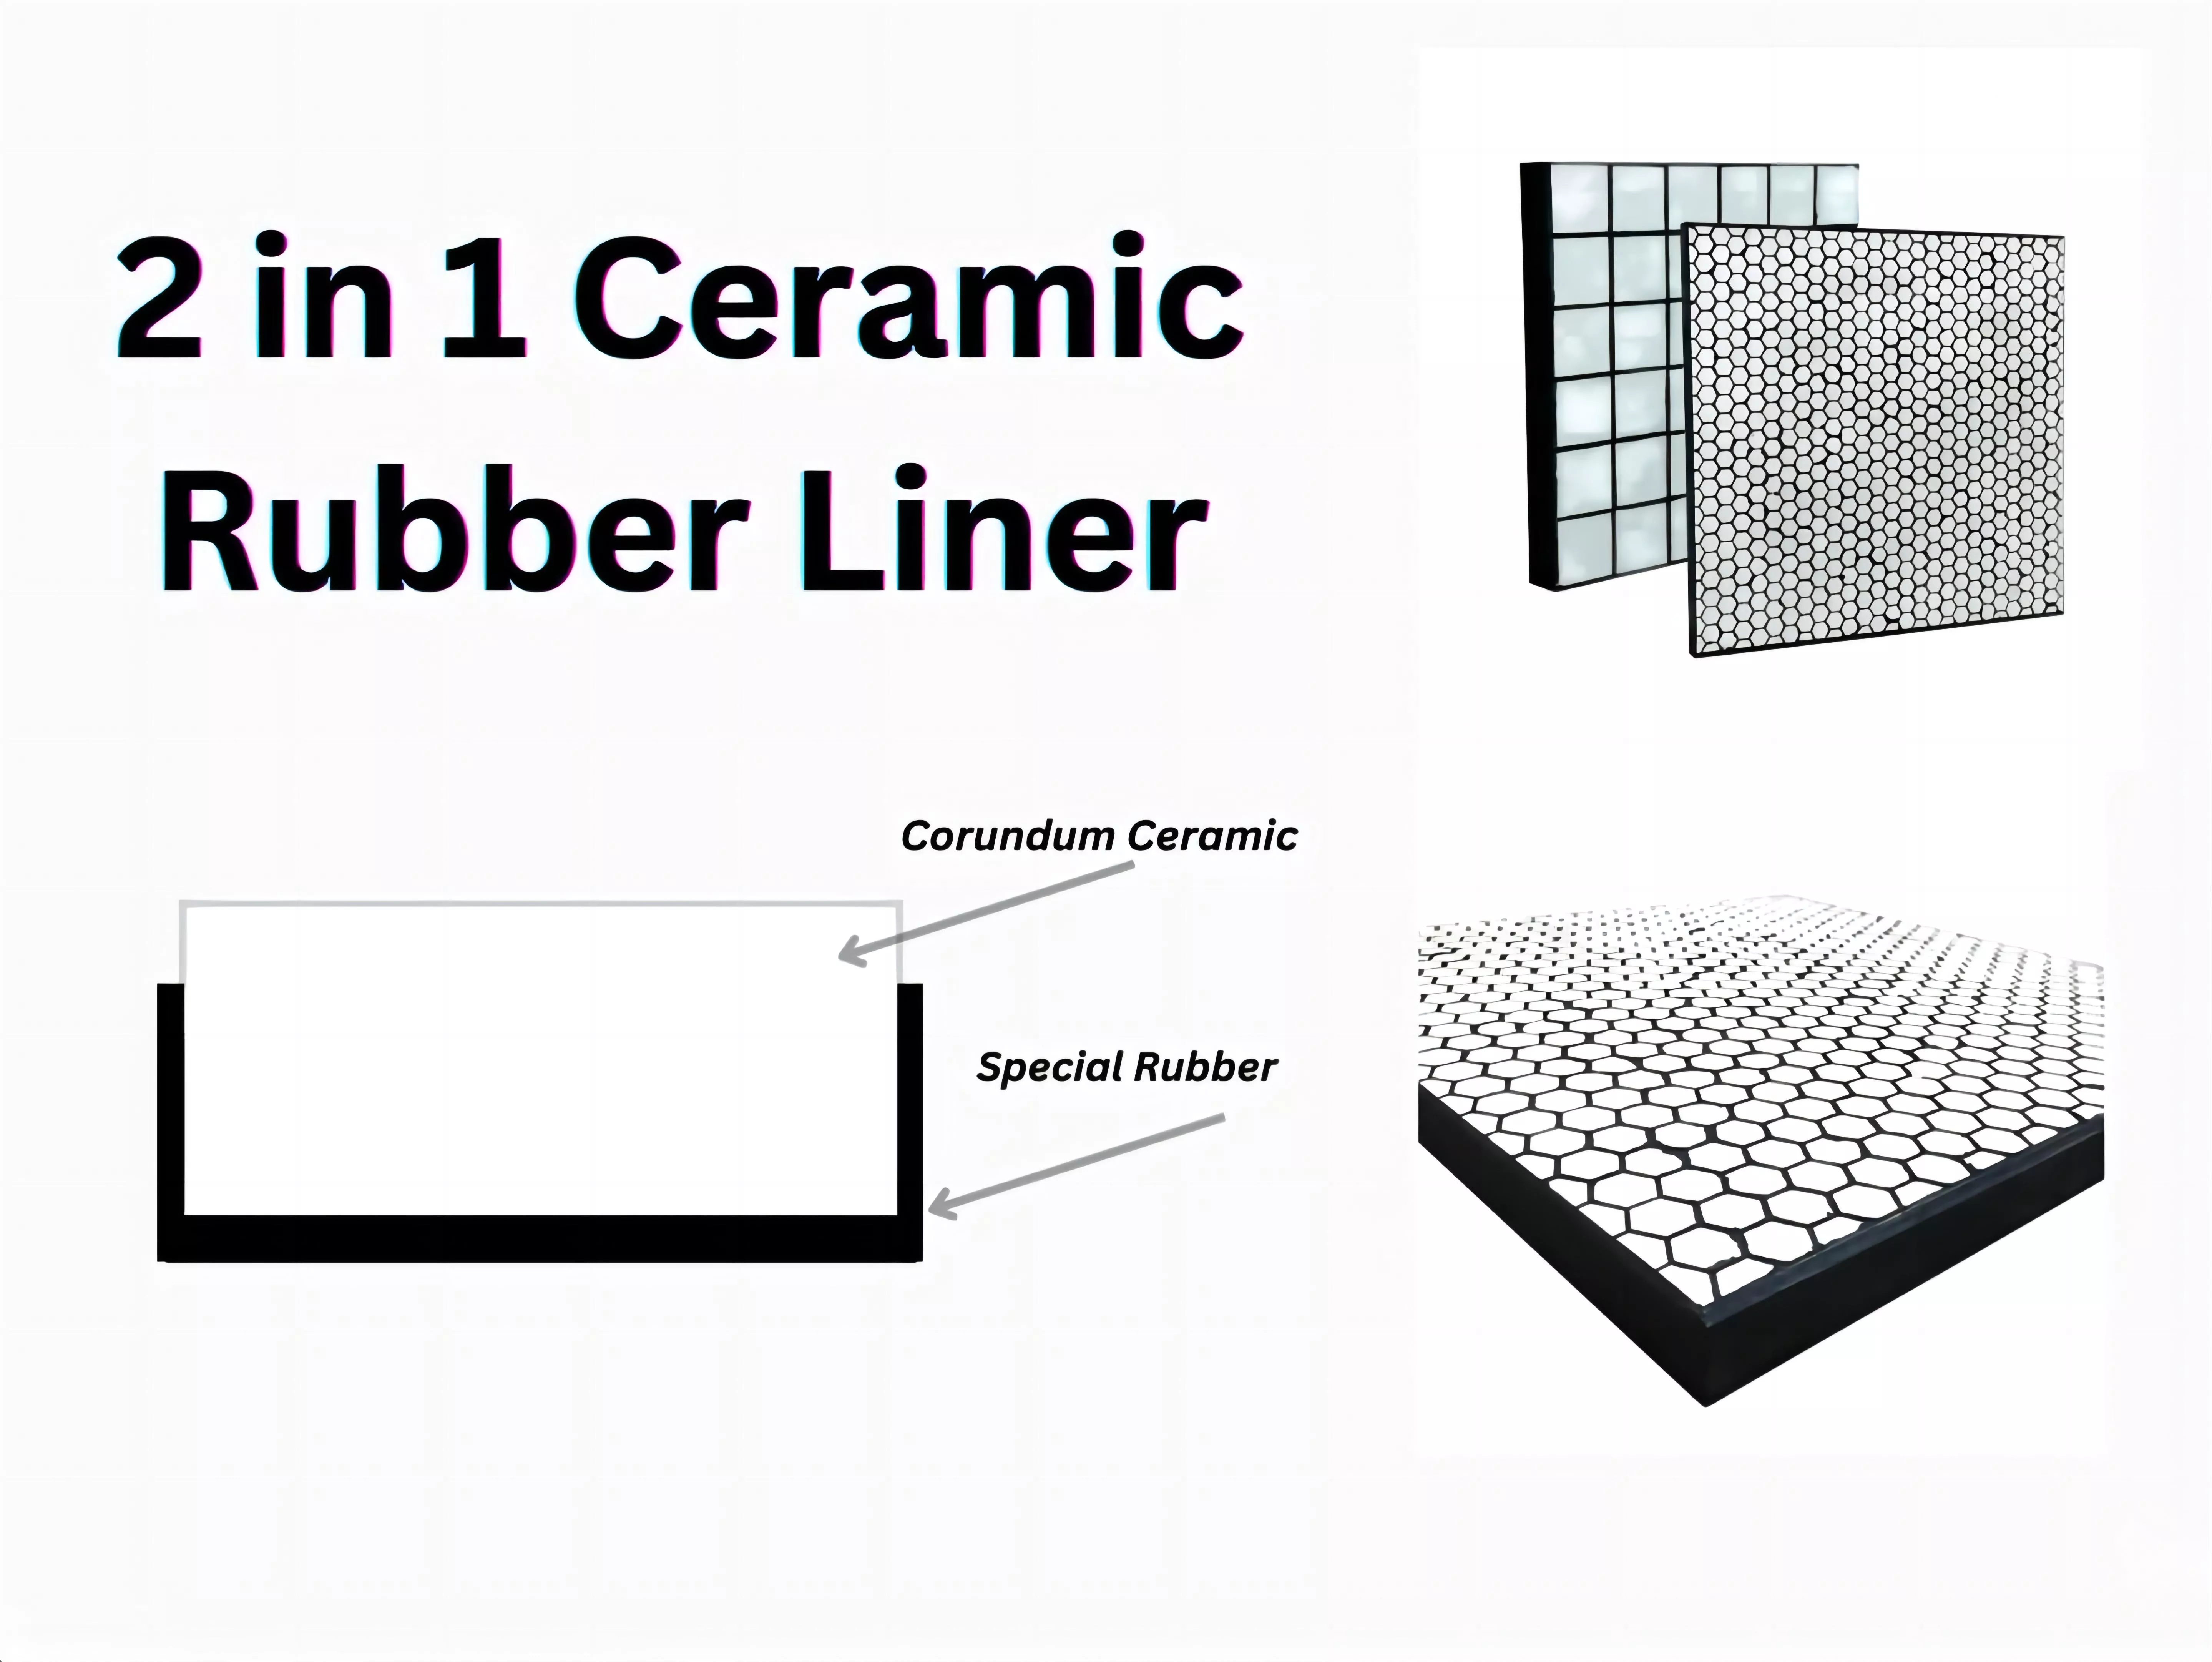 Ceramic Rubber 2 in 1 Liners